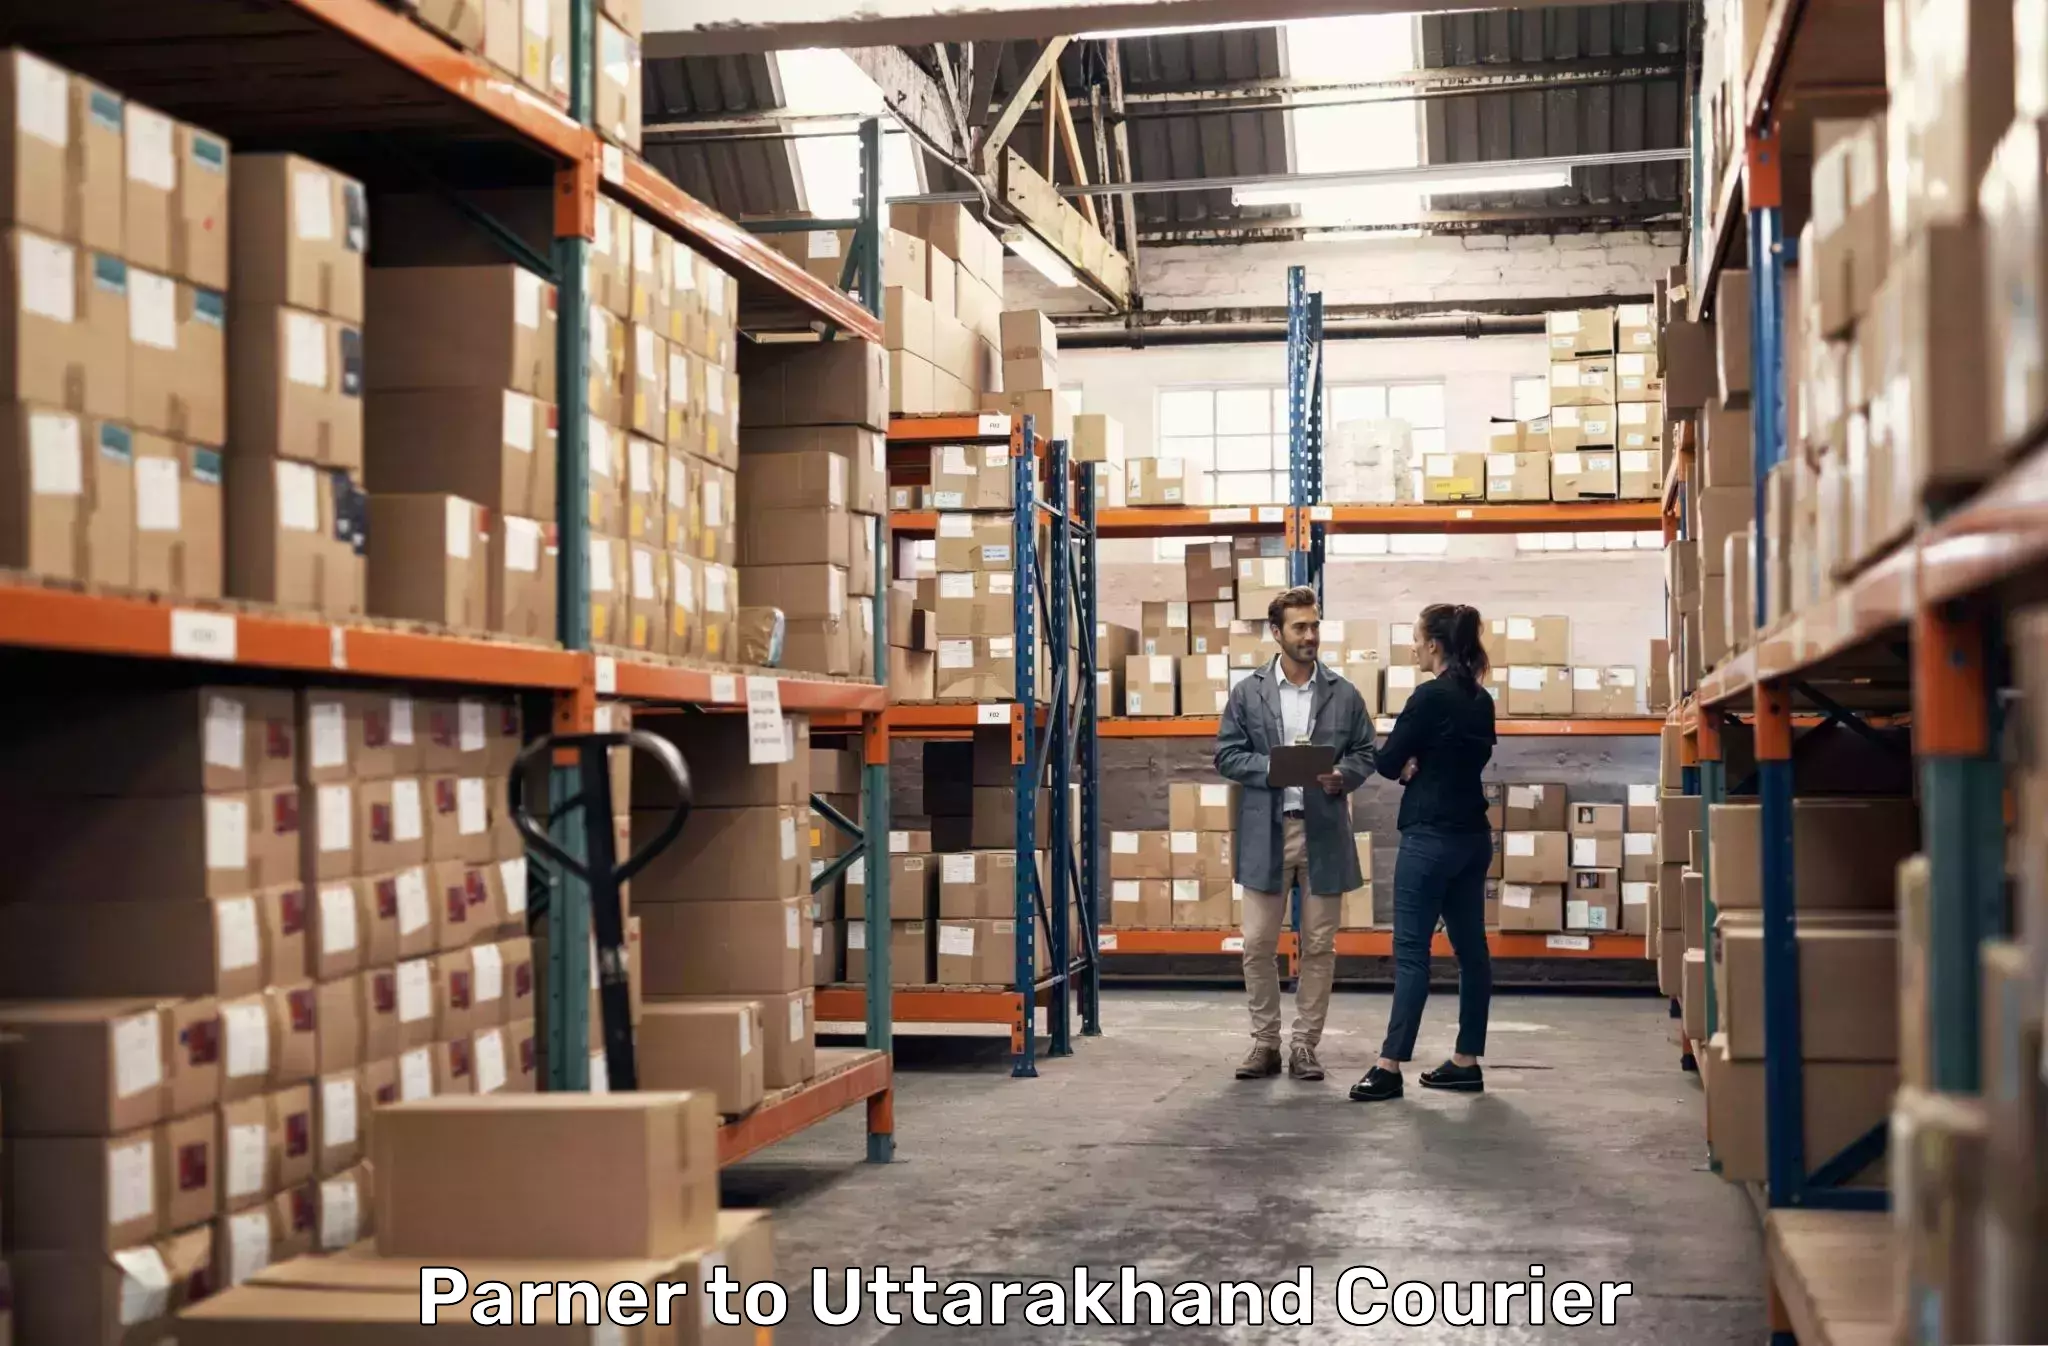 Global courier networks Parner to Paithani